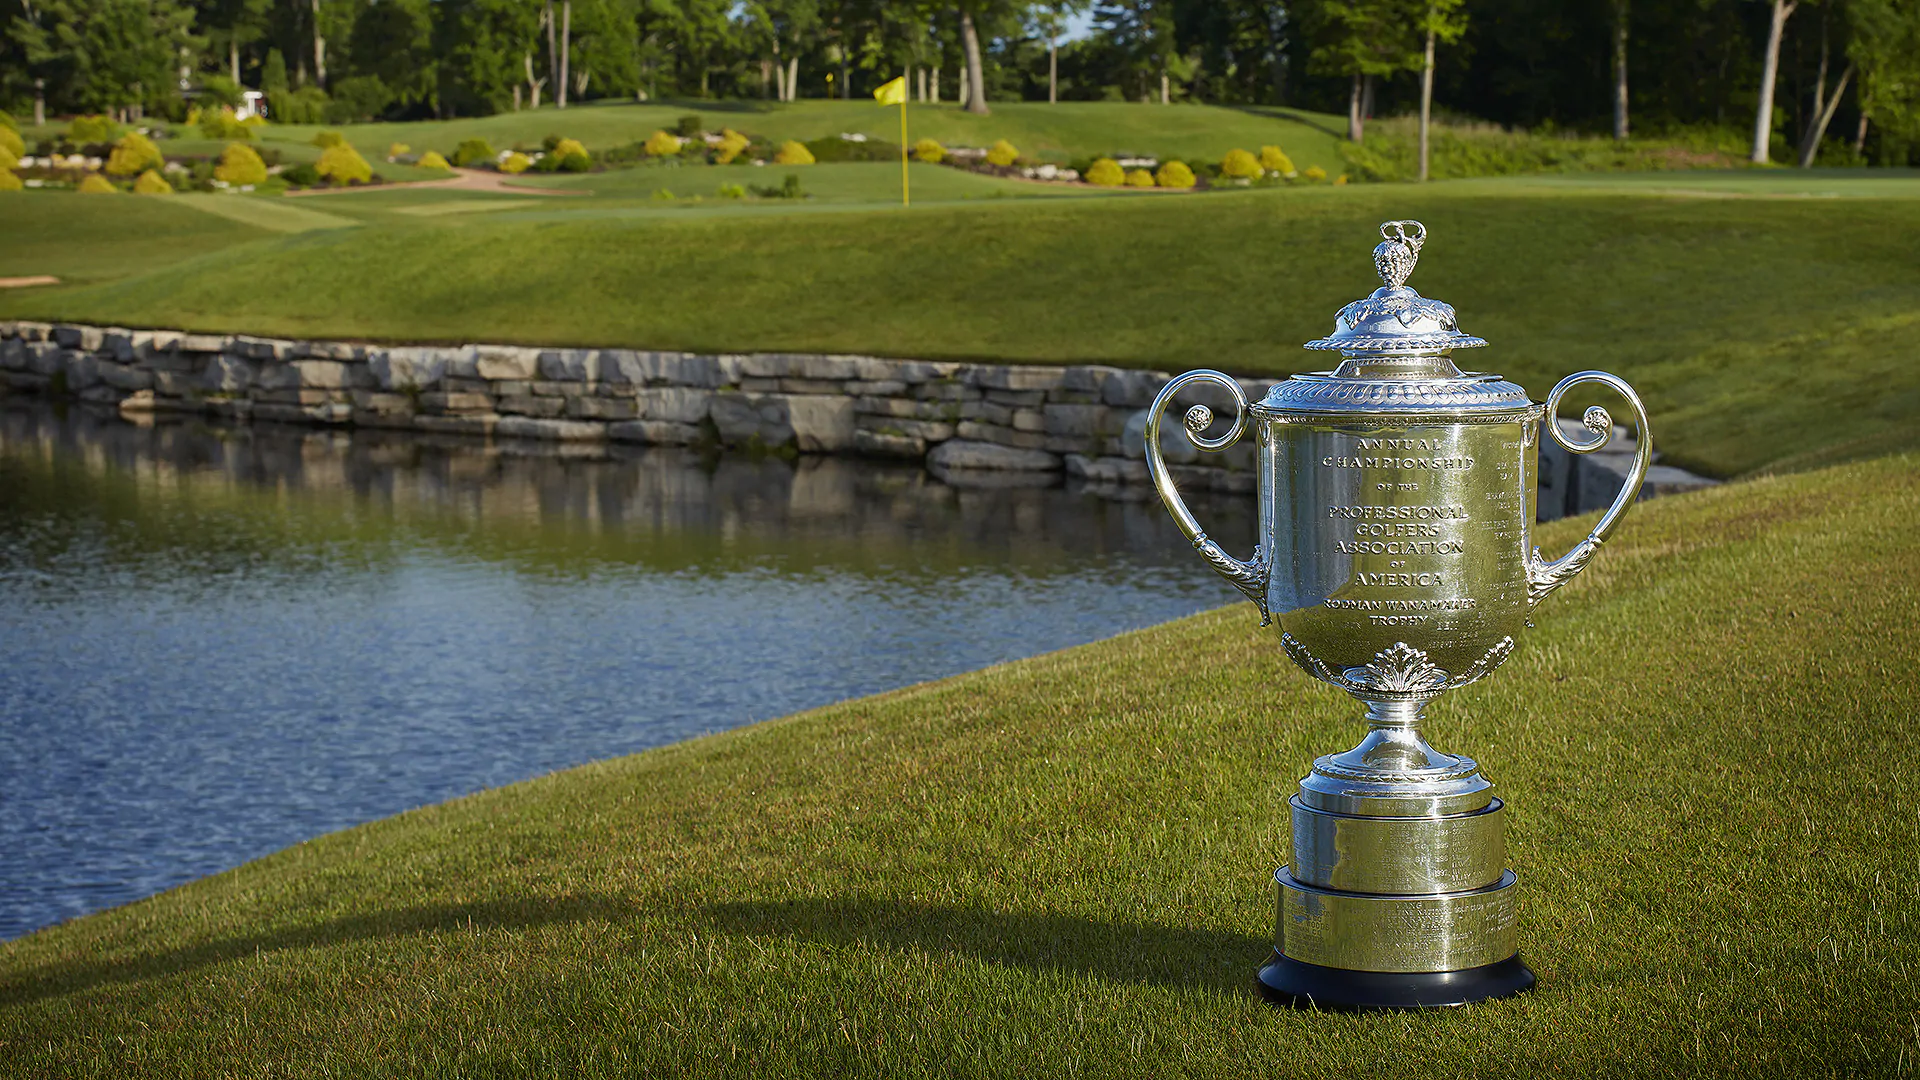 How to watch the PGA Championship on TV and online